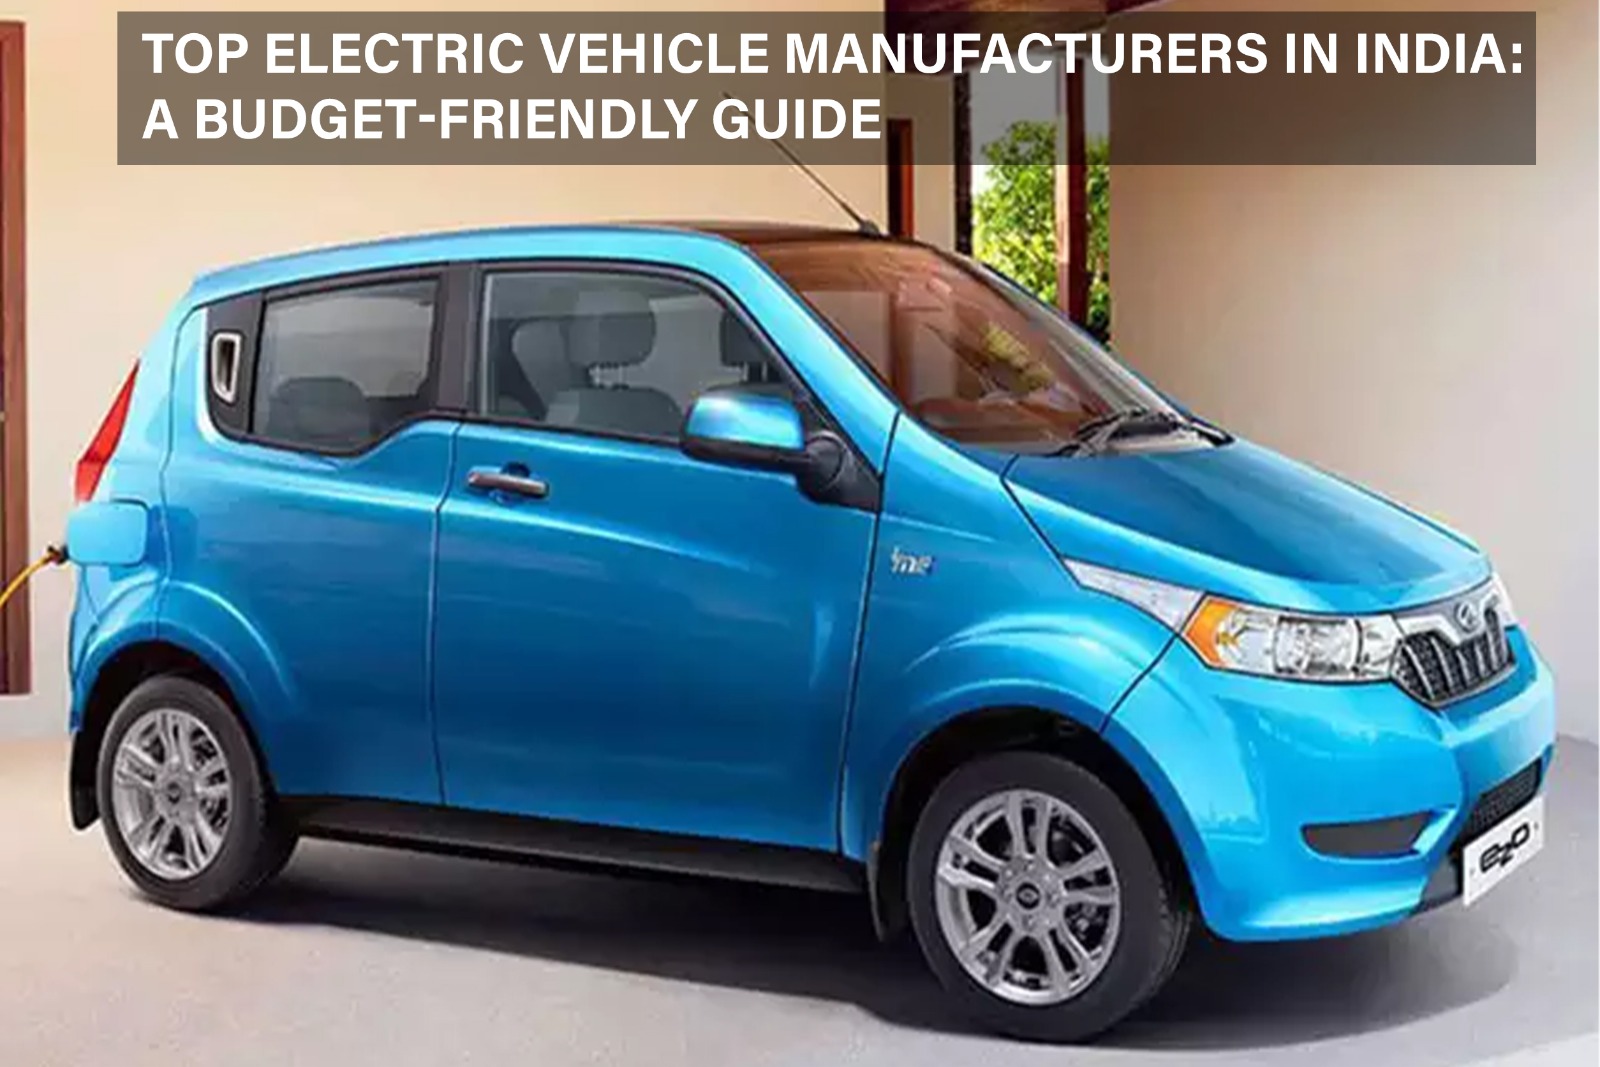 Top Electric Vehicle Manufacturers in India: A Budget-Friendly Guide